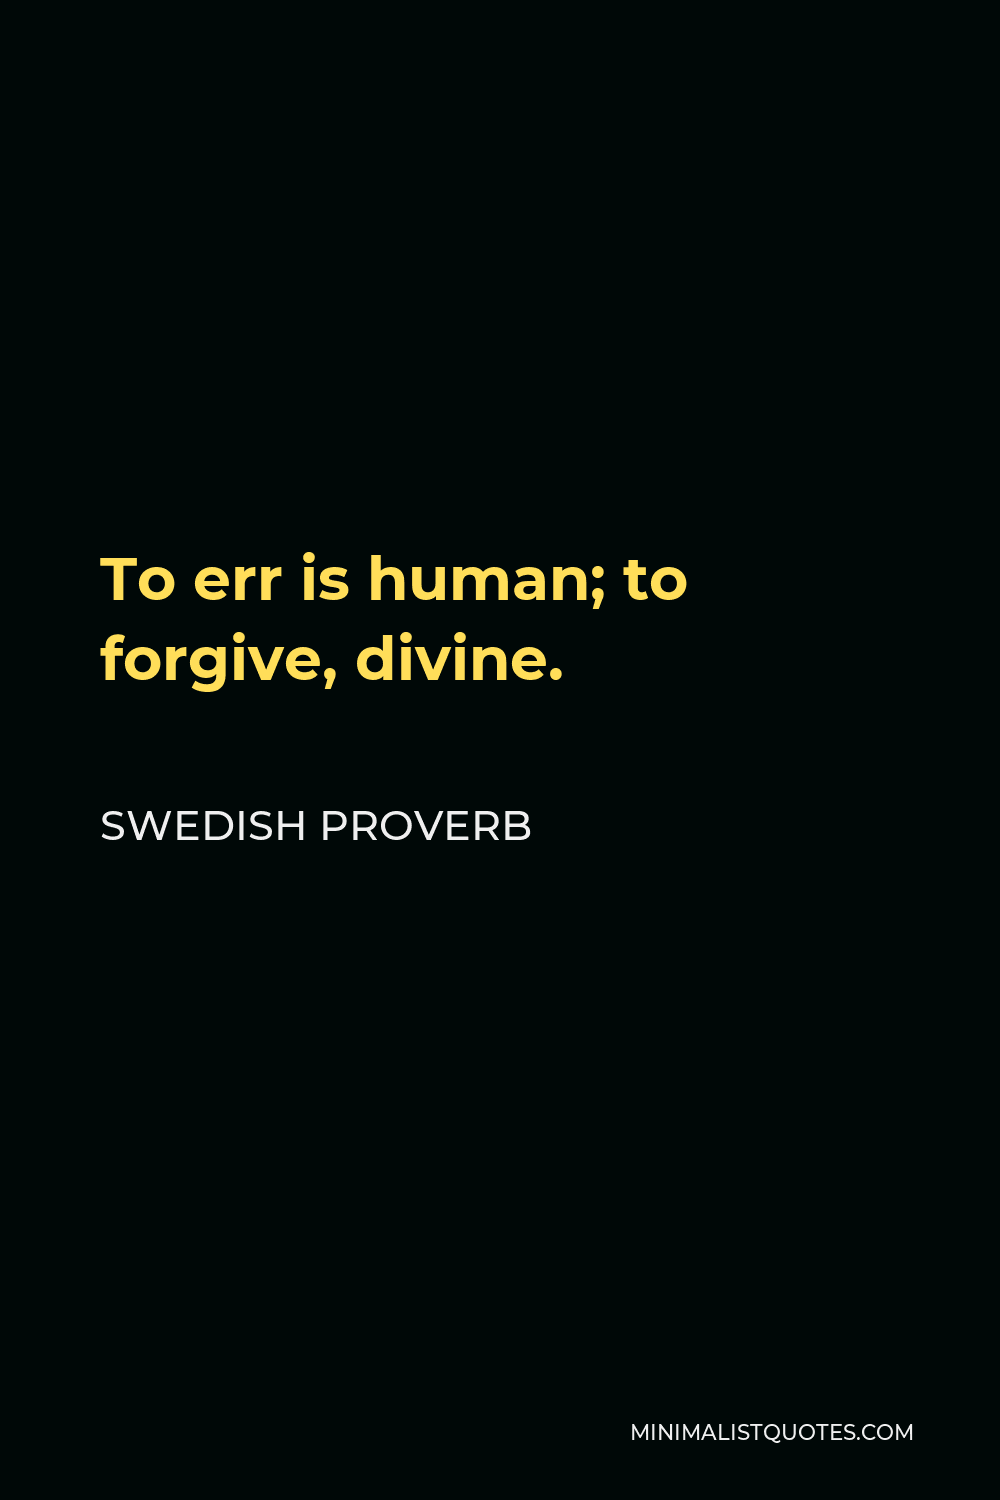 Swedish Proverb Quote - To err is human; to forgive, divine.